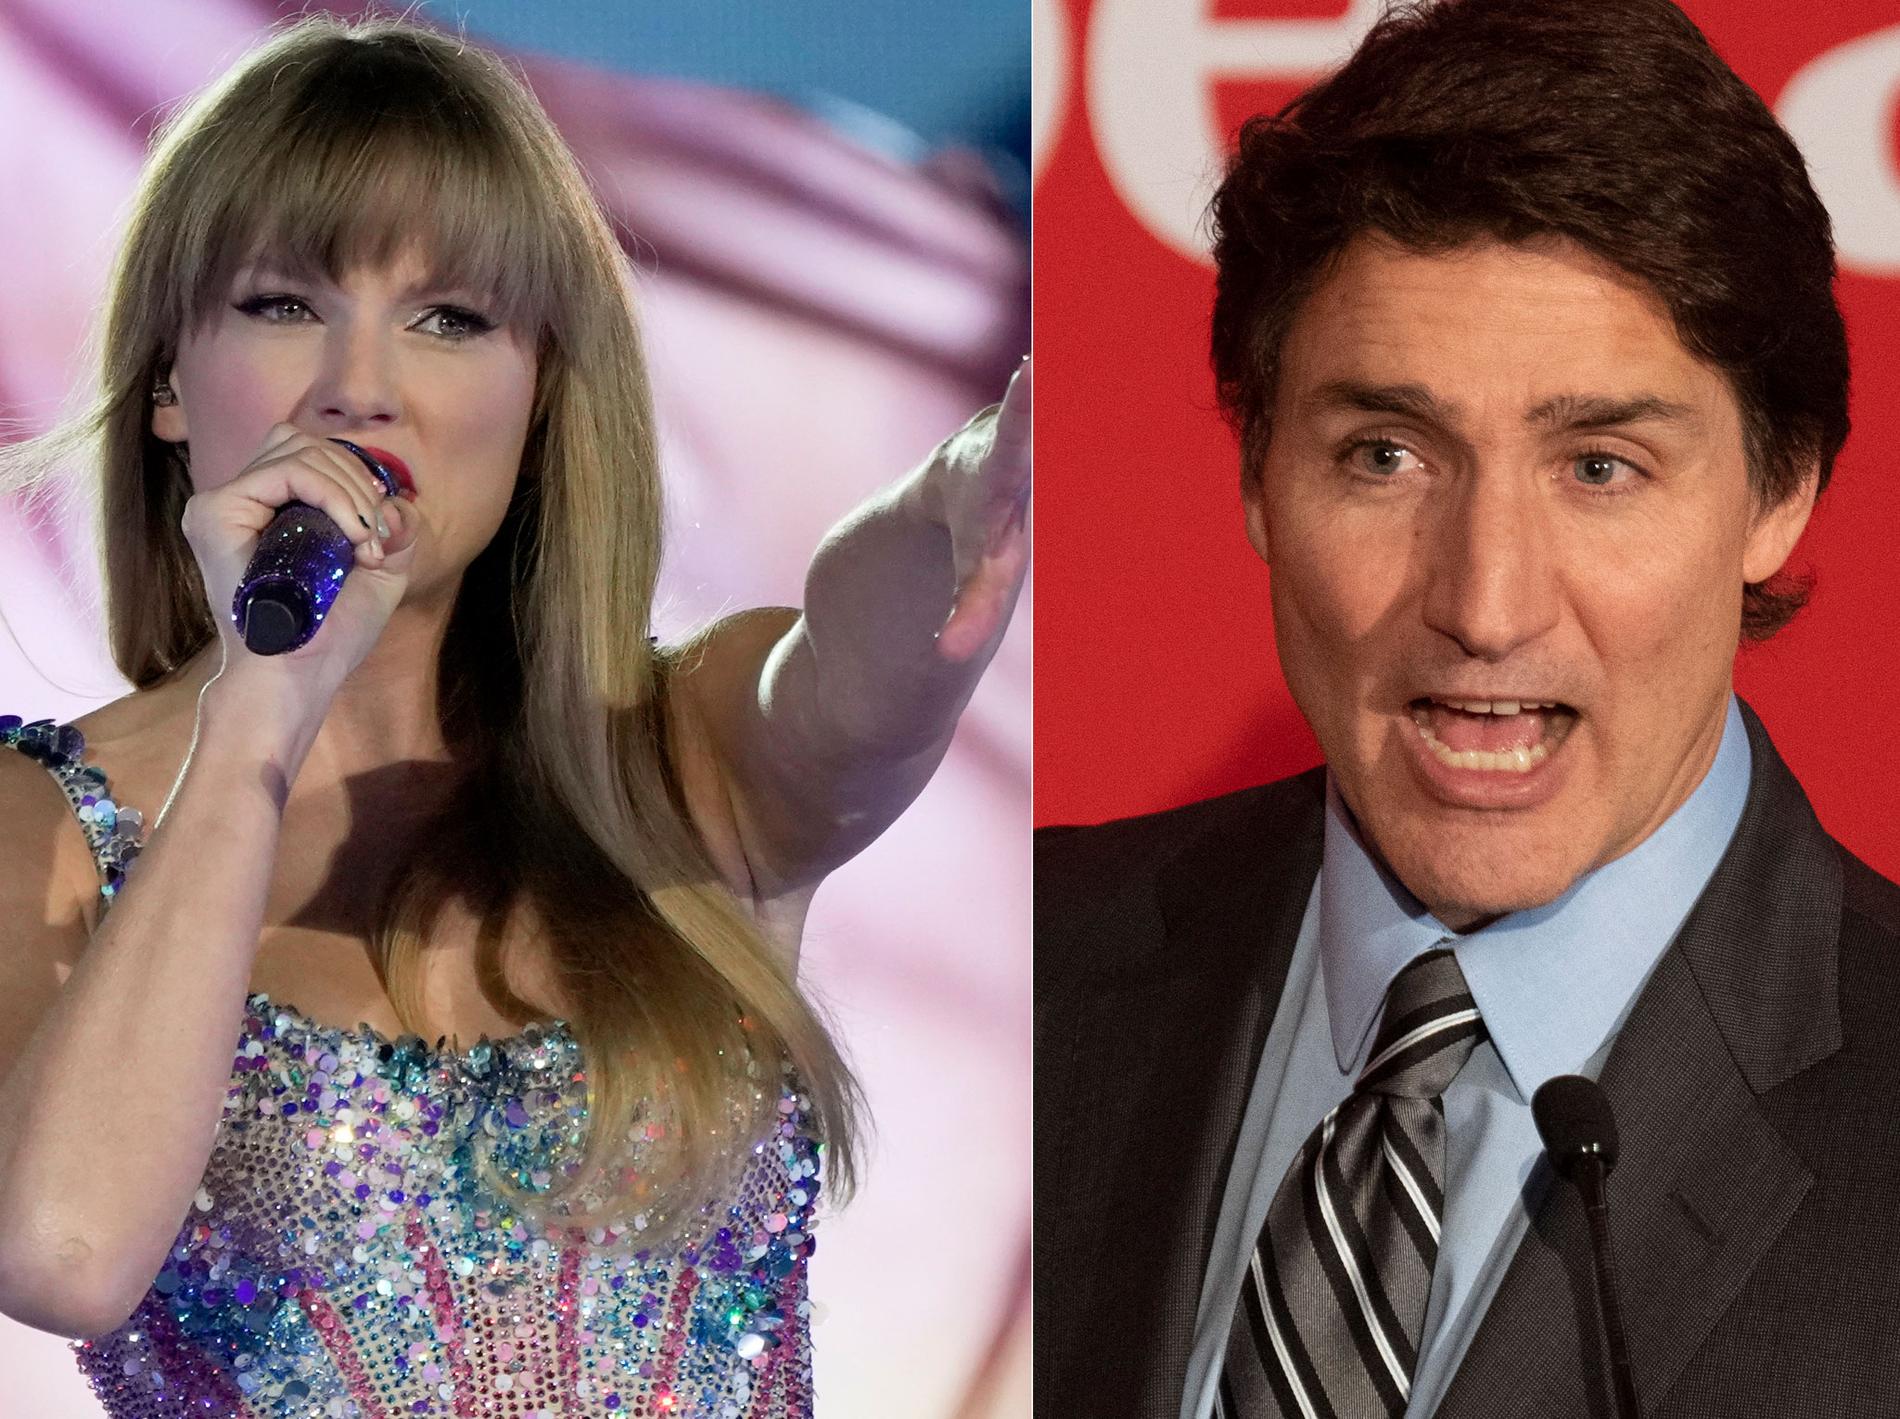 Canadian Prime Minister Justin Trudeau asked Taylor Swift to visit